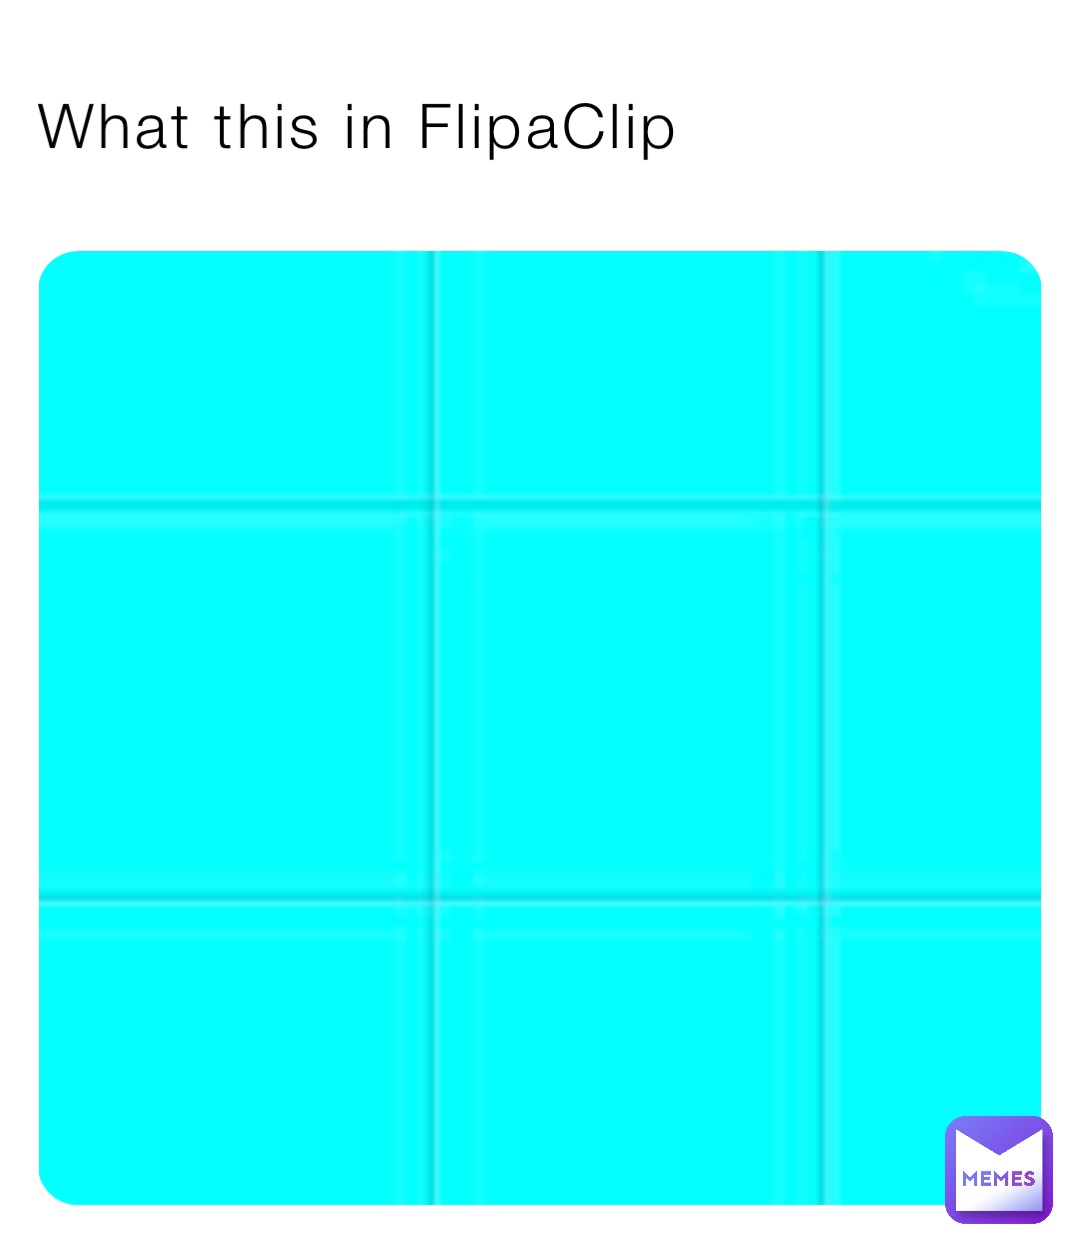 What this in FlipaClip